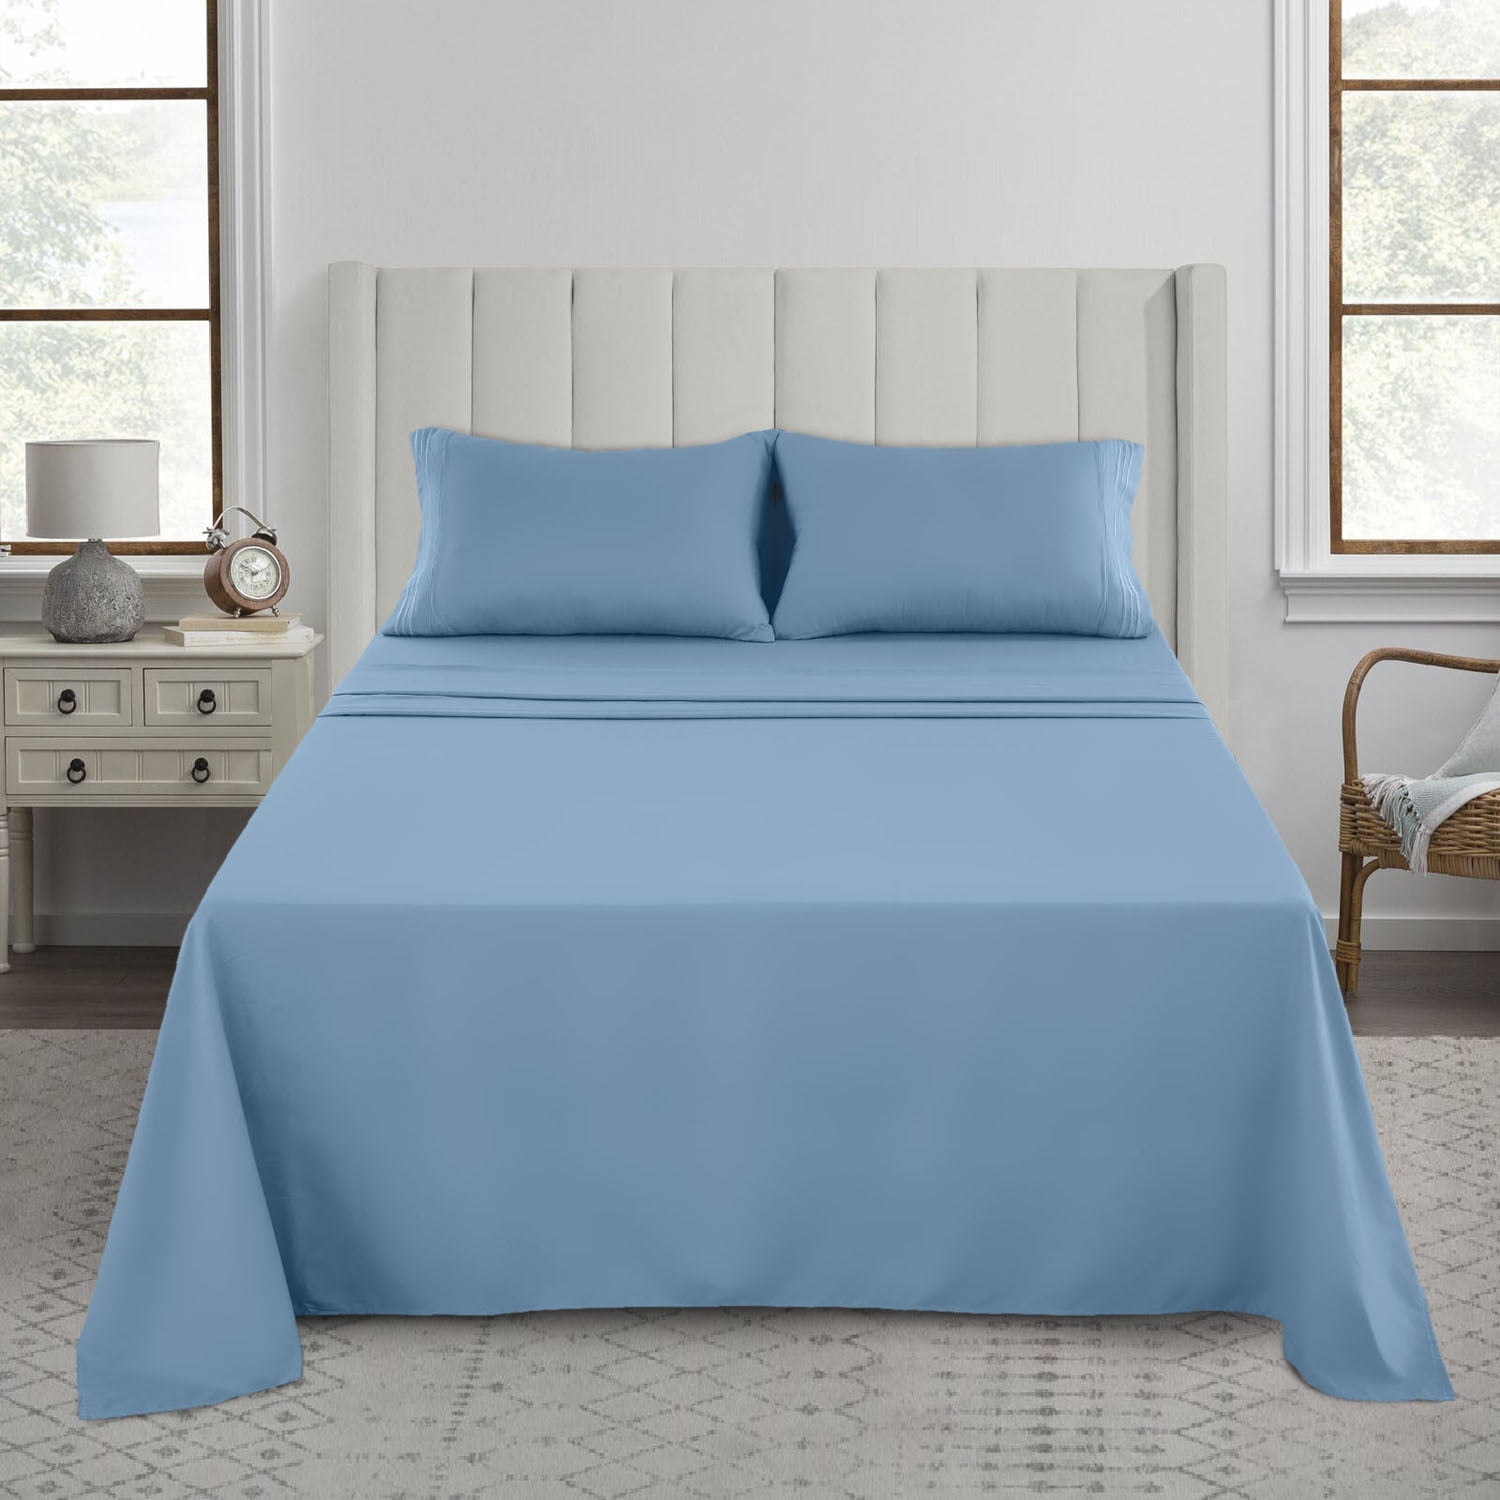 Lux Decor Collection Microfiber Bed Sheets Set, Deep Pocket Twin Sheet,  Fitted Sheet, Flat Sheet & Pillowcases Bedding Set- Blue 